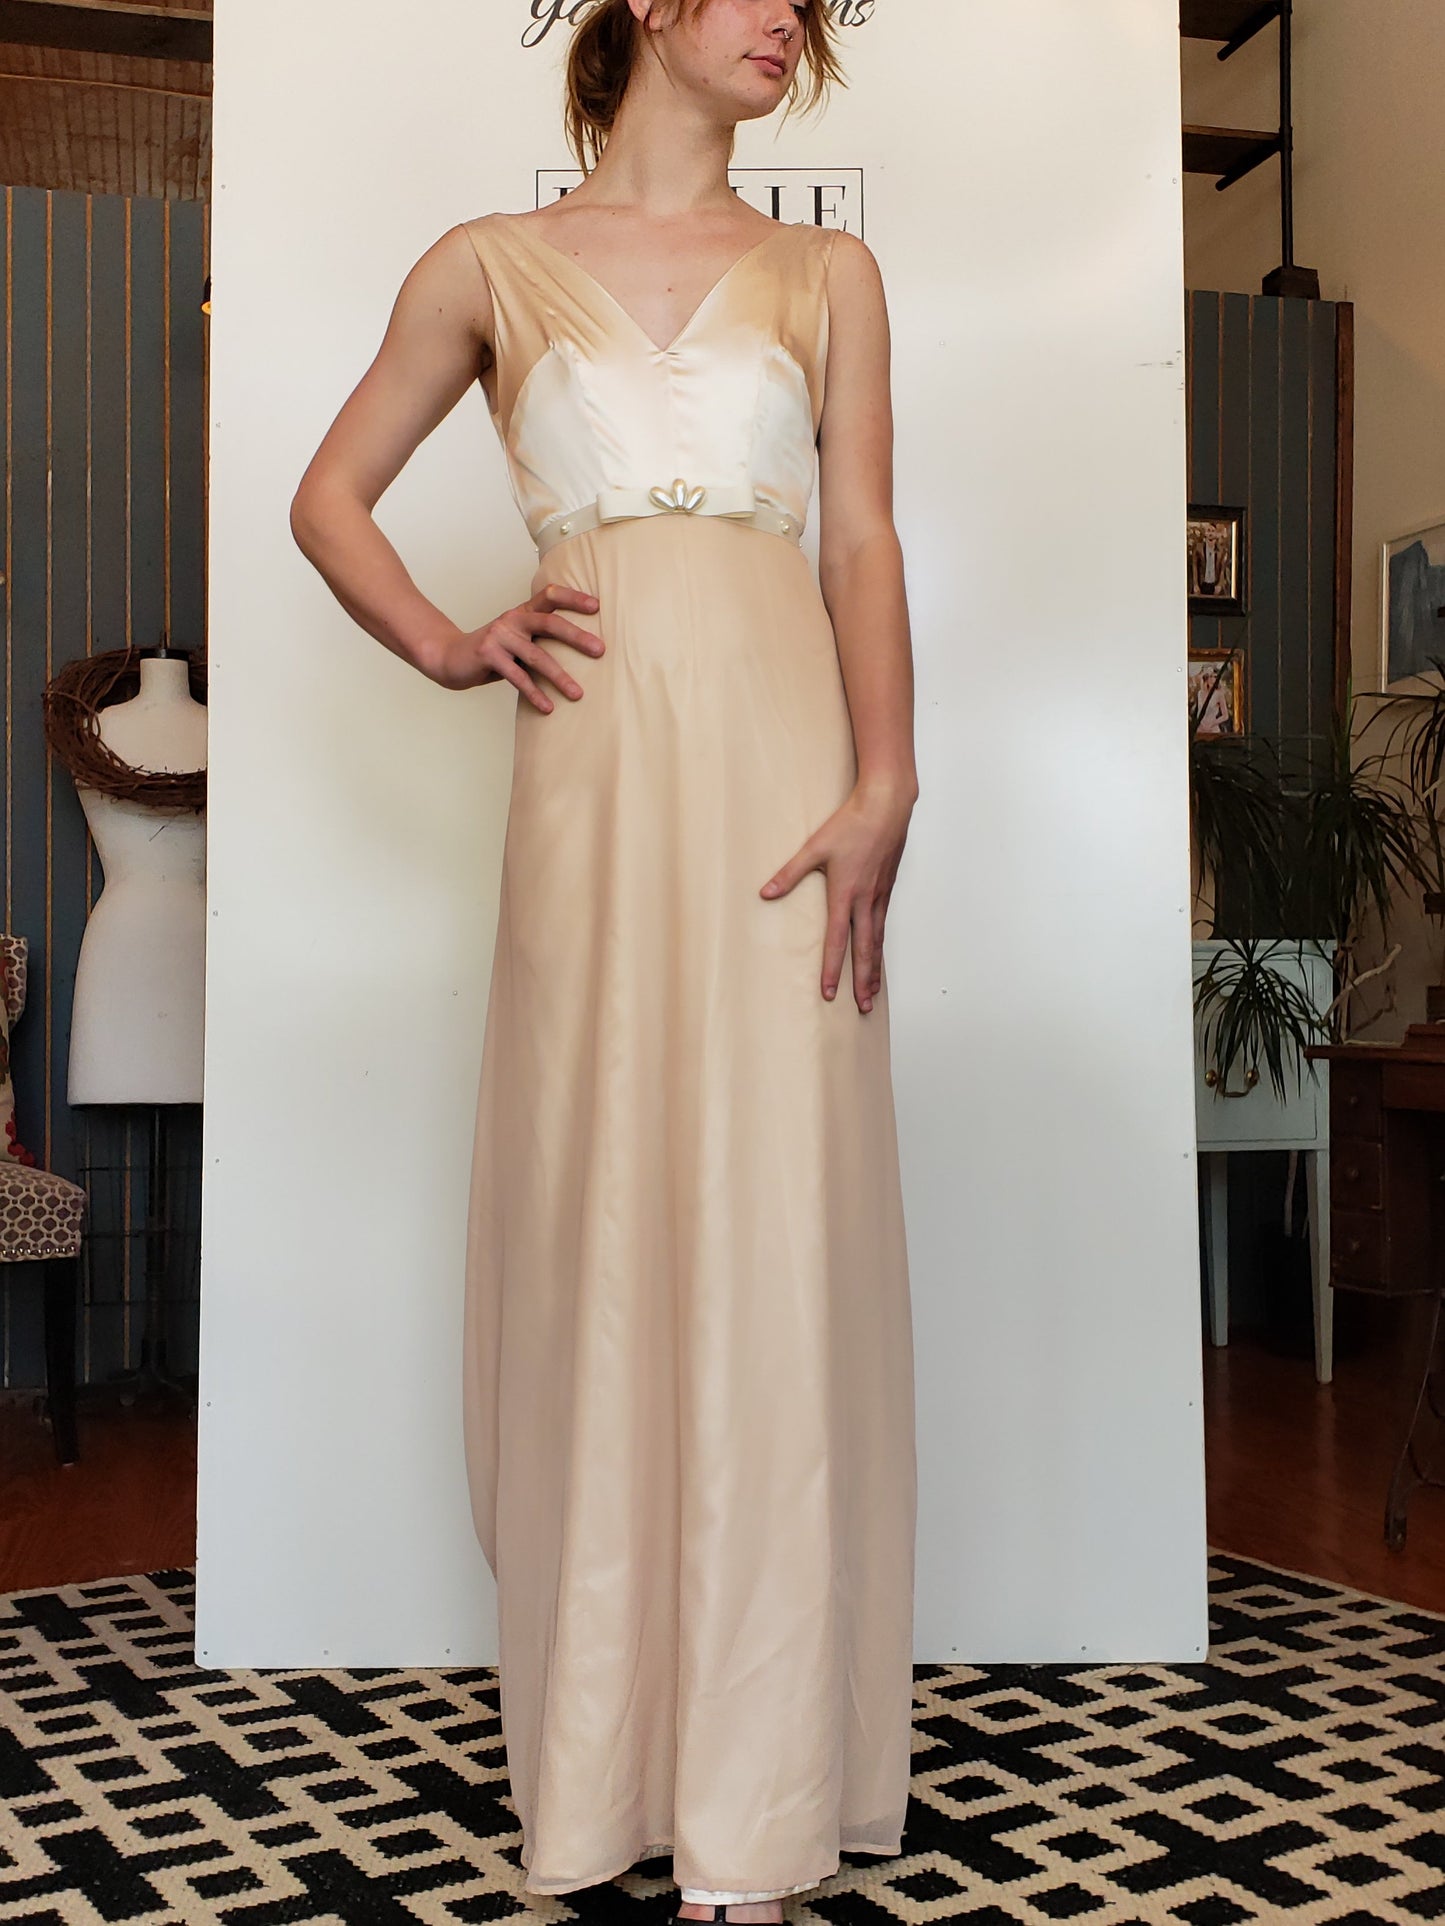 Champagne-Silk and Silk-Chiffon Wedding Gown with Pearl Beading